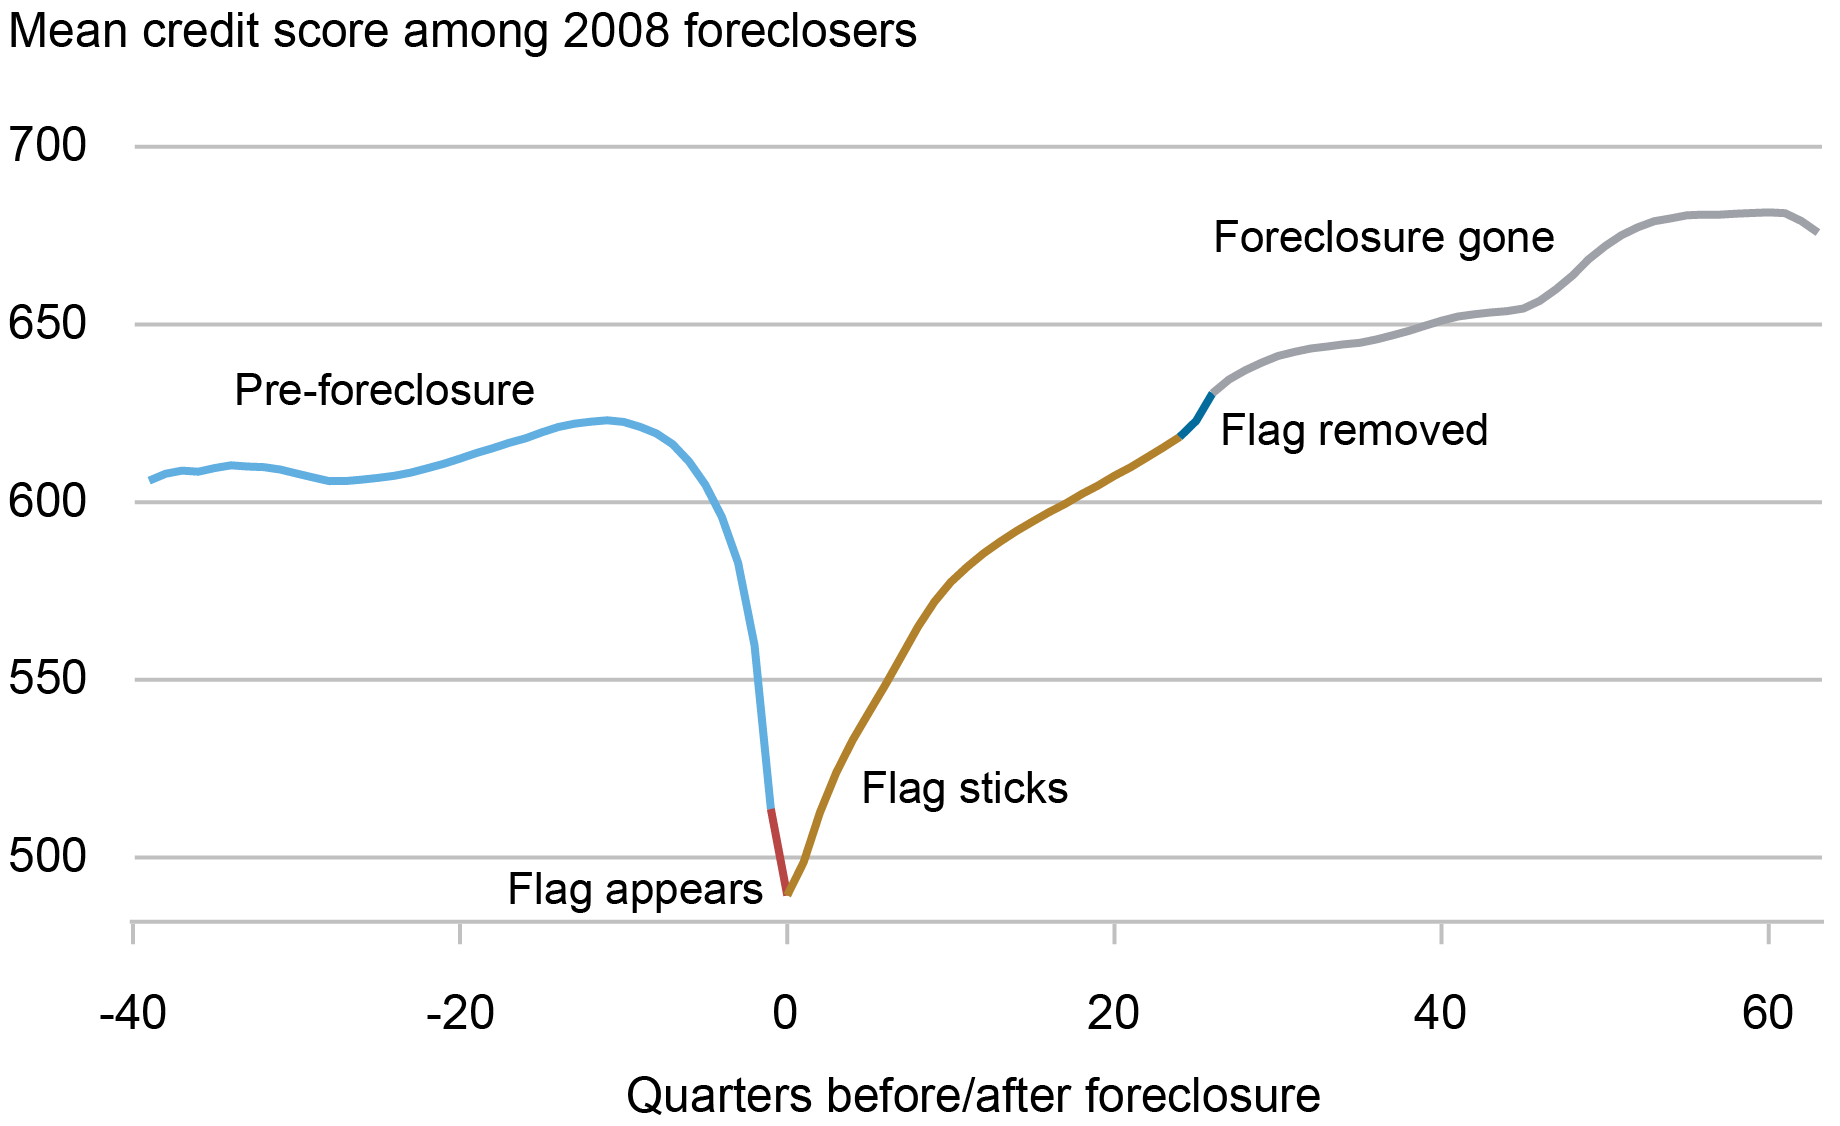 Alt=”Line chart showing the mean credit score of individuals with a foreclosure flag added to their credit report during 2008; colors represent pre-foreclosure (light blue), flag appears (red), flag sticks (gold), flag removed (dark blue), and foreclosure gone (gray)” 